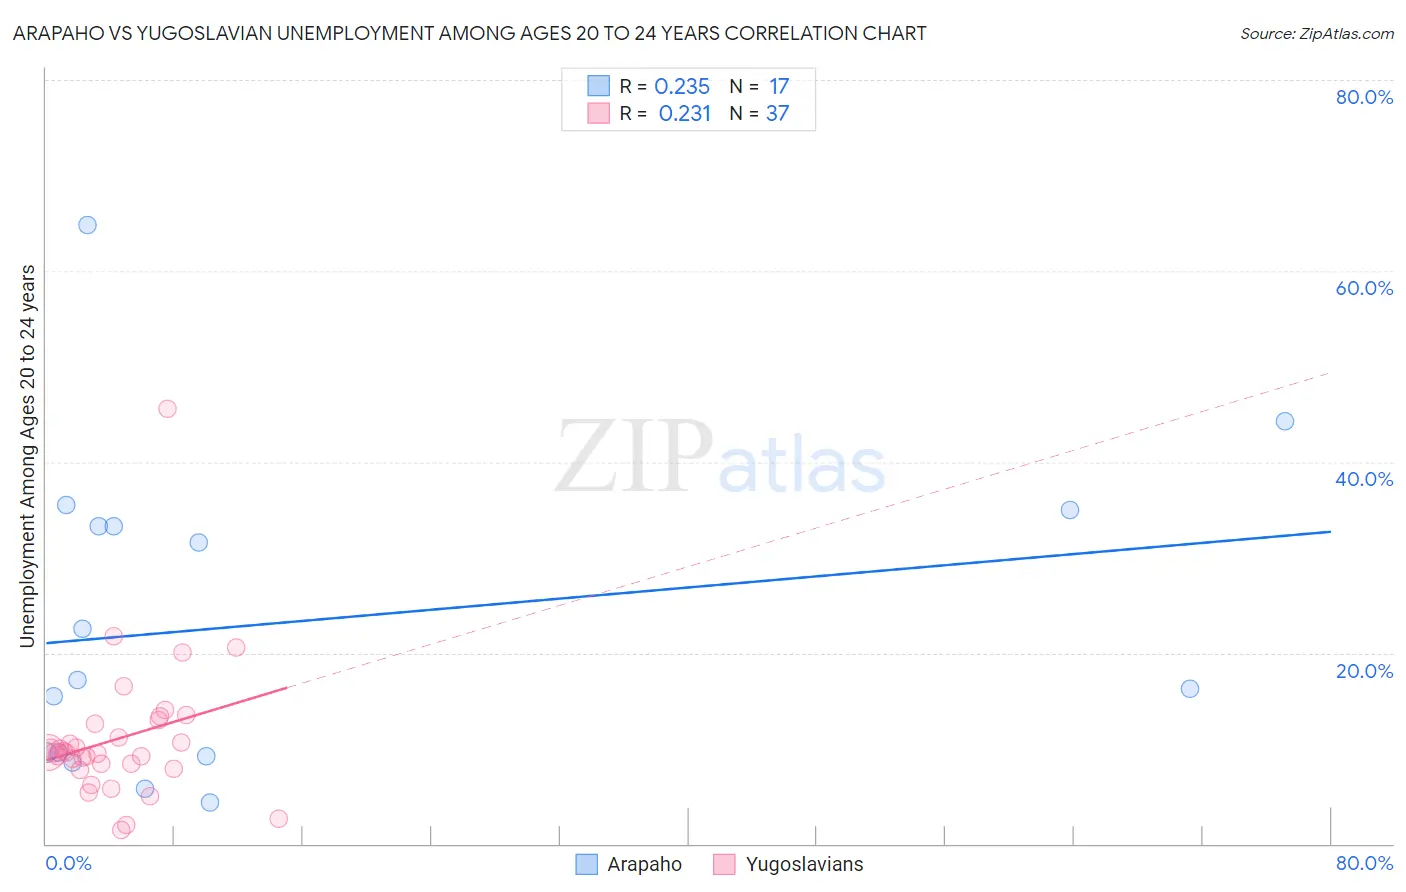 Arapaho vs Yugoslavian Unemployment Among Ages 20 to 24 years